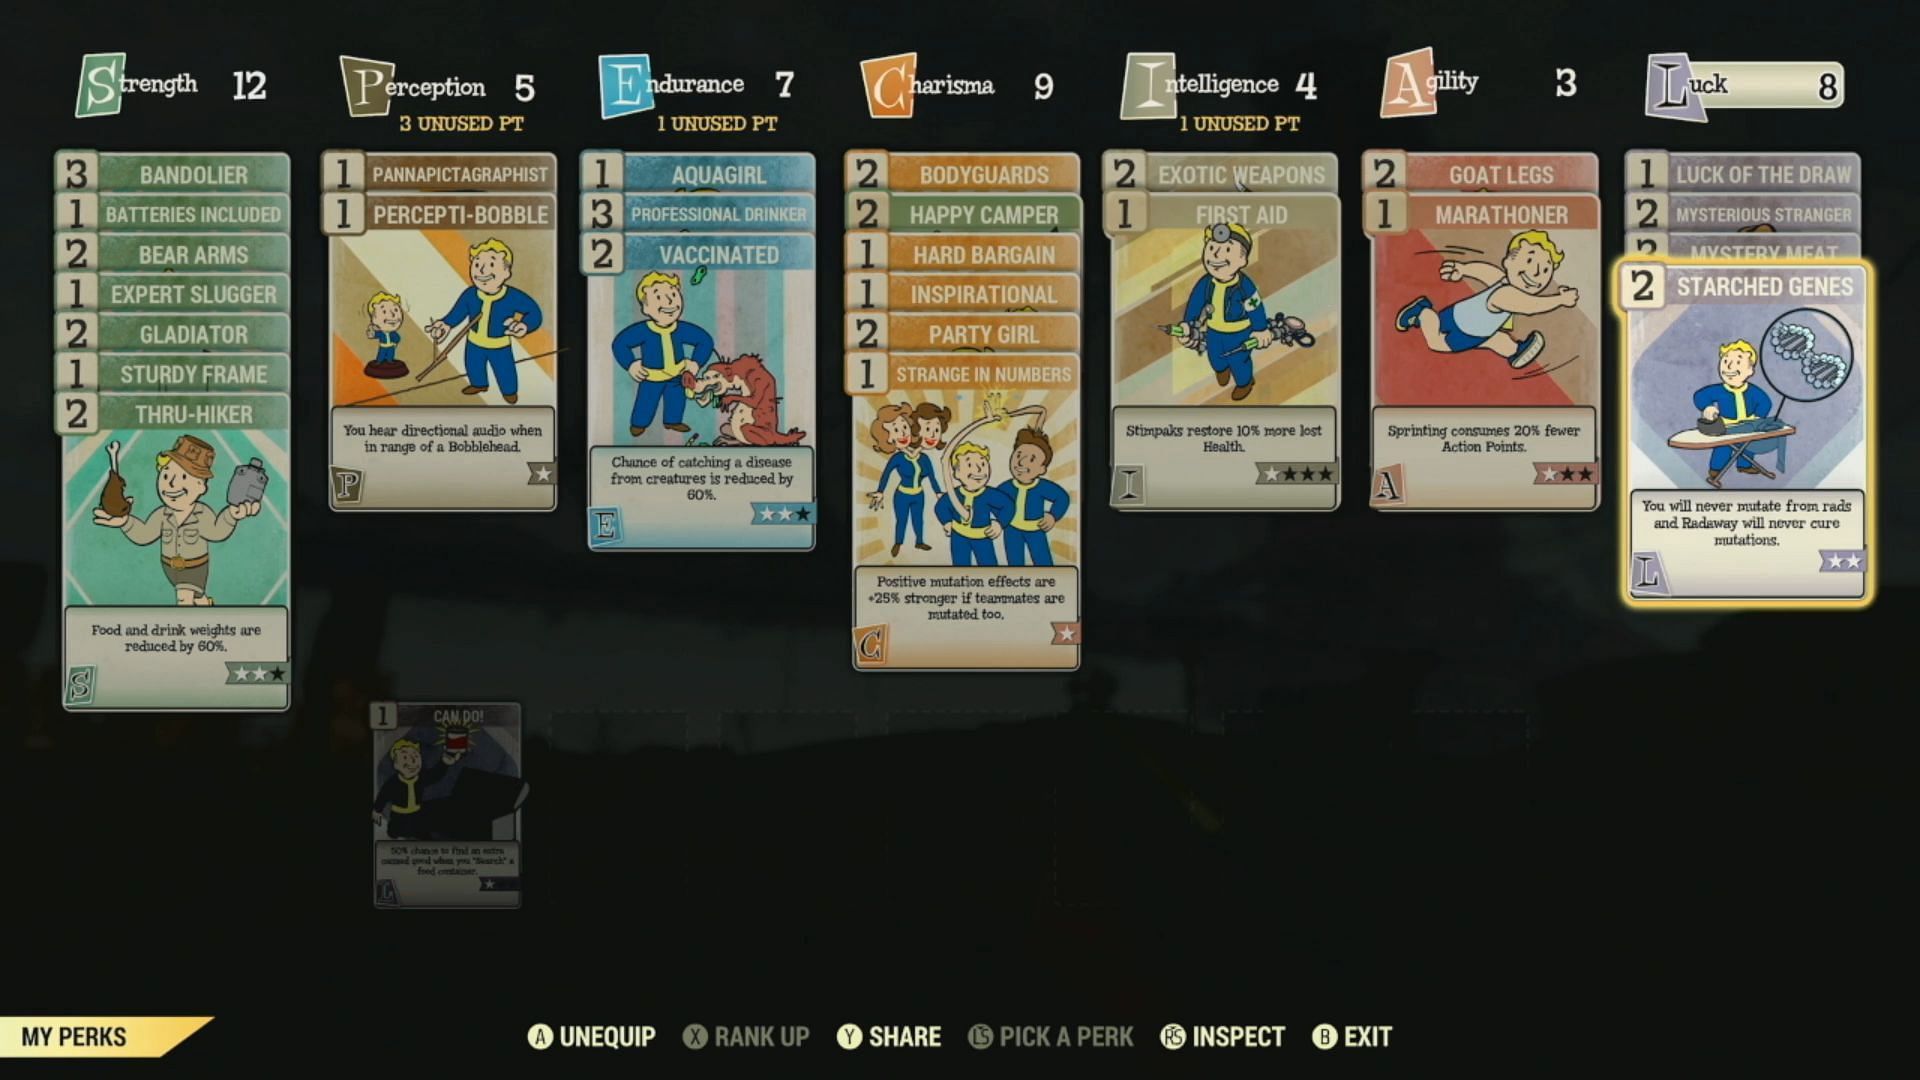 Investing in Perk Cards are extremely necessary when playing the game solo (Image via Bethesda Game Studios)